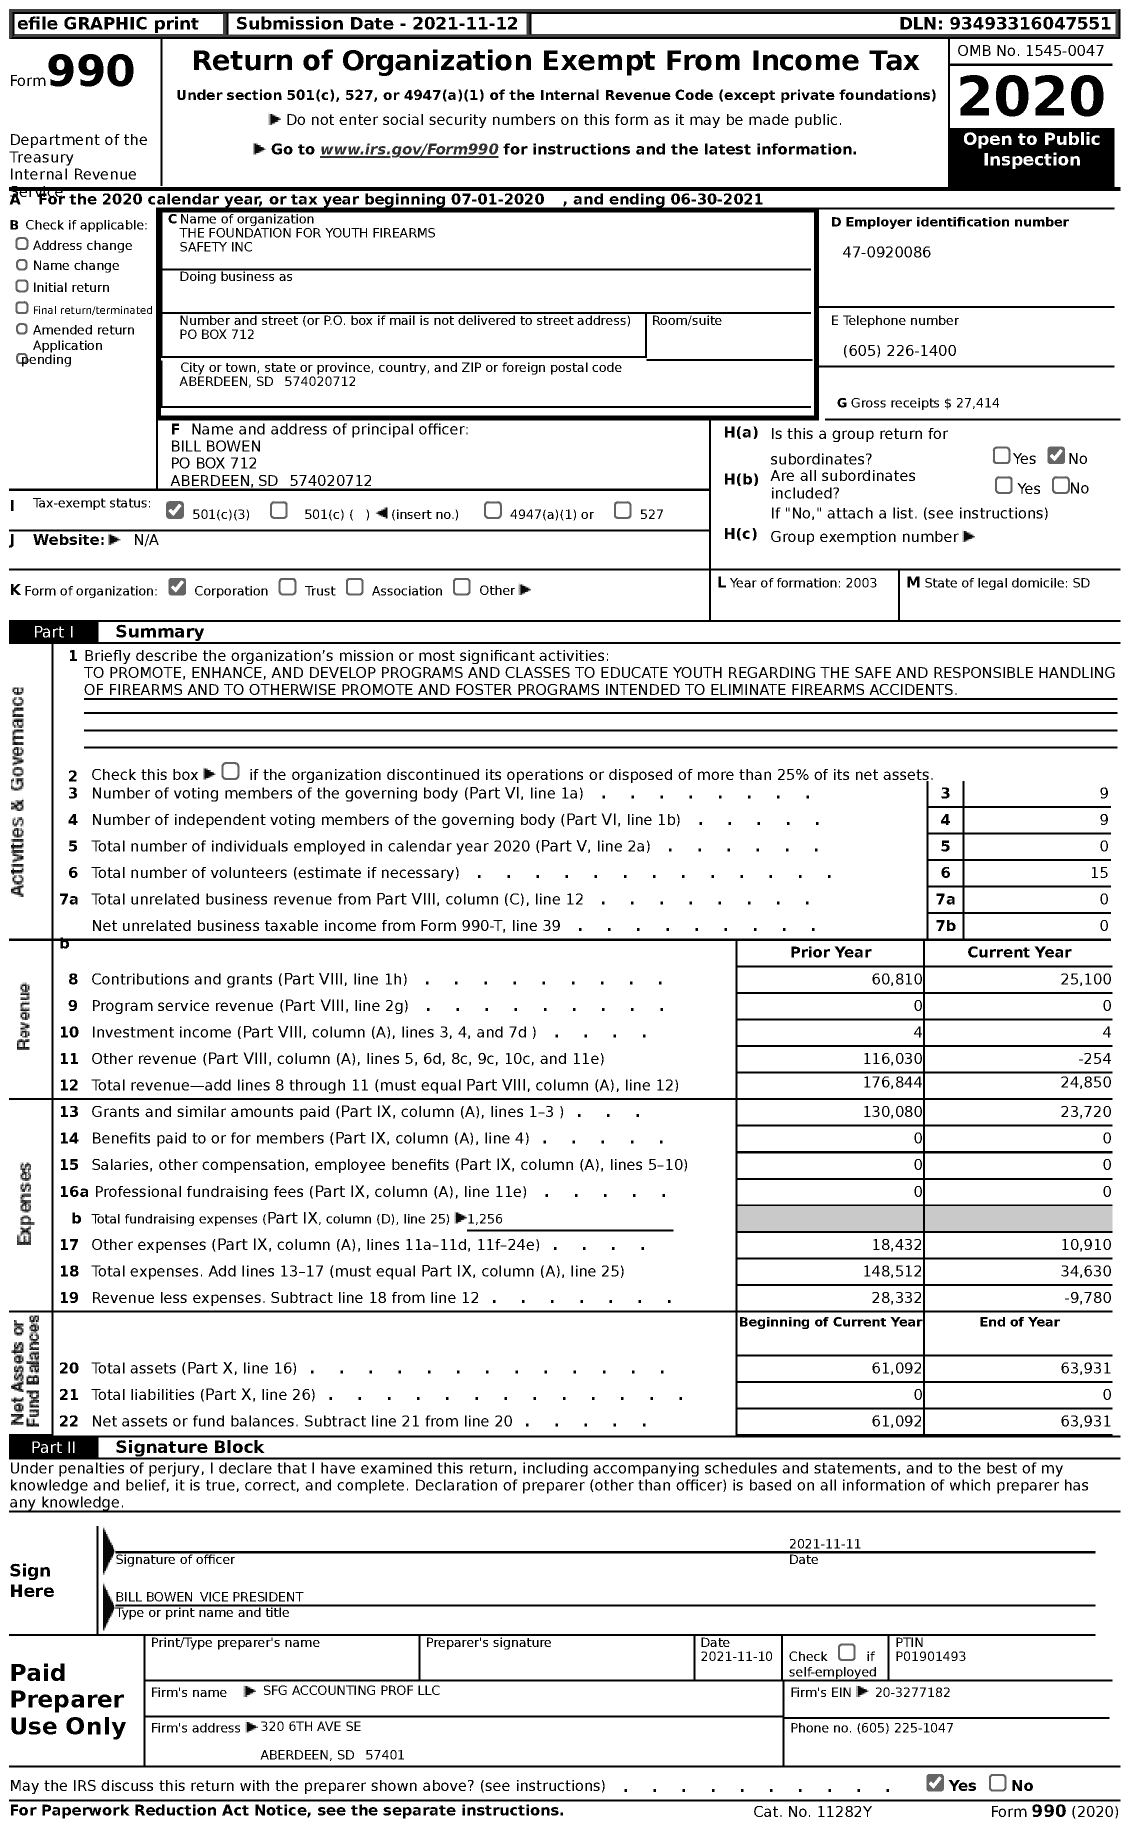 Image of first page of 2020 Form 990 for The Foundation for Youth Firearms Safety